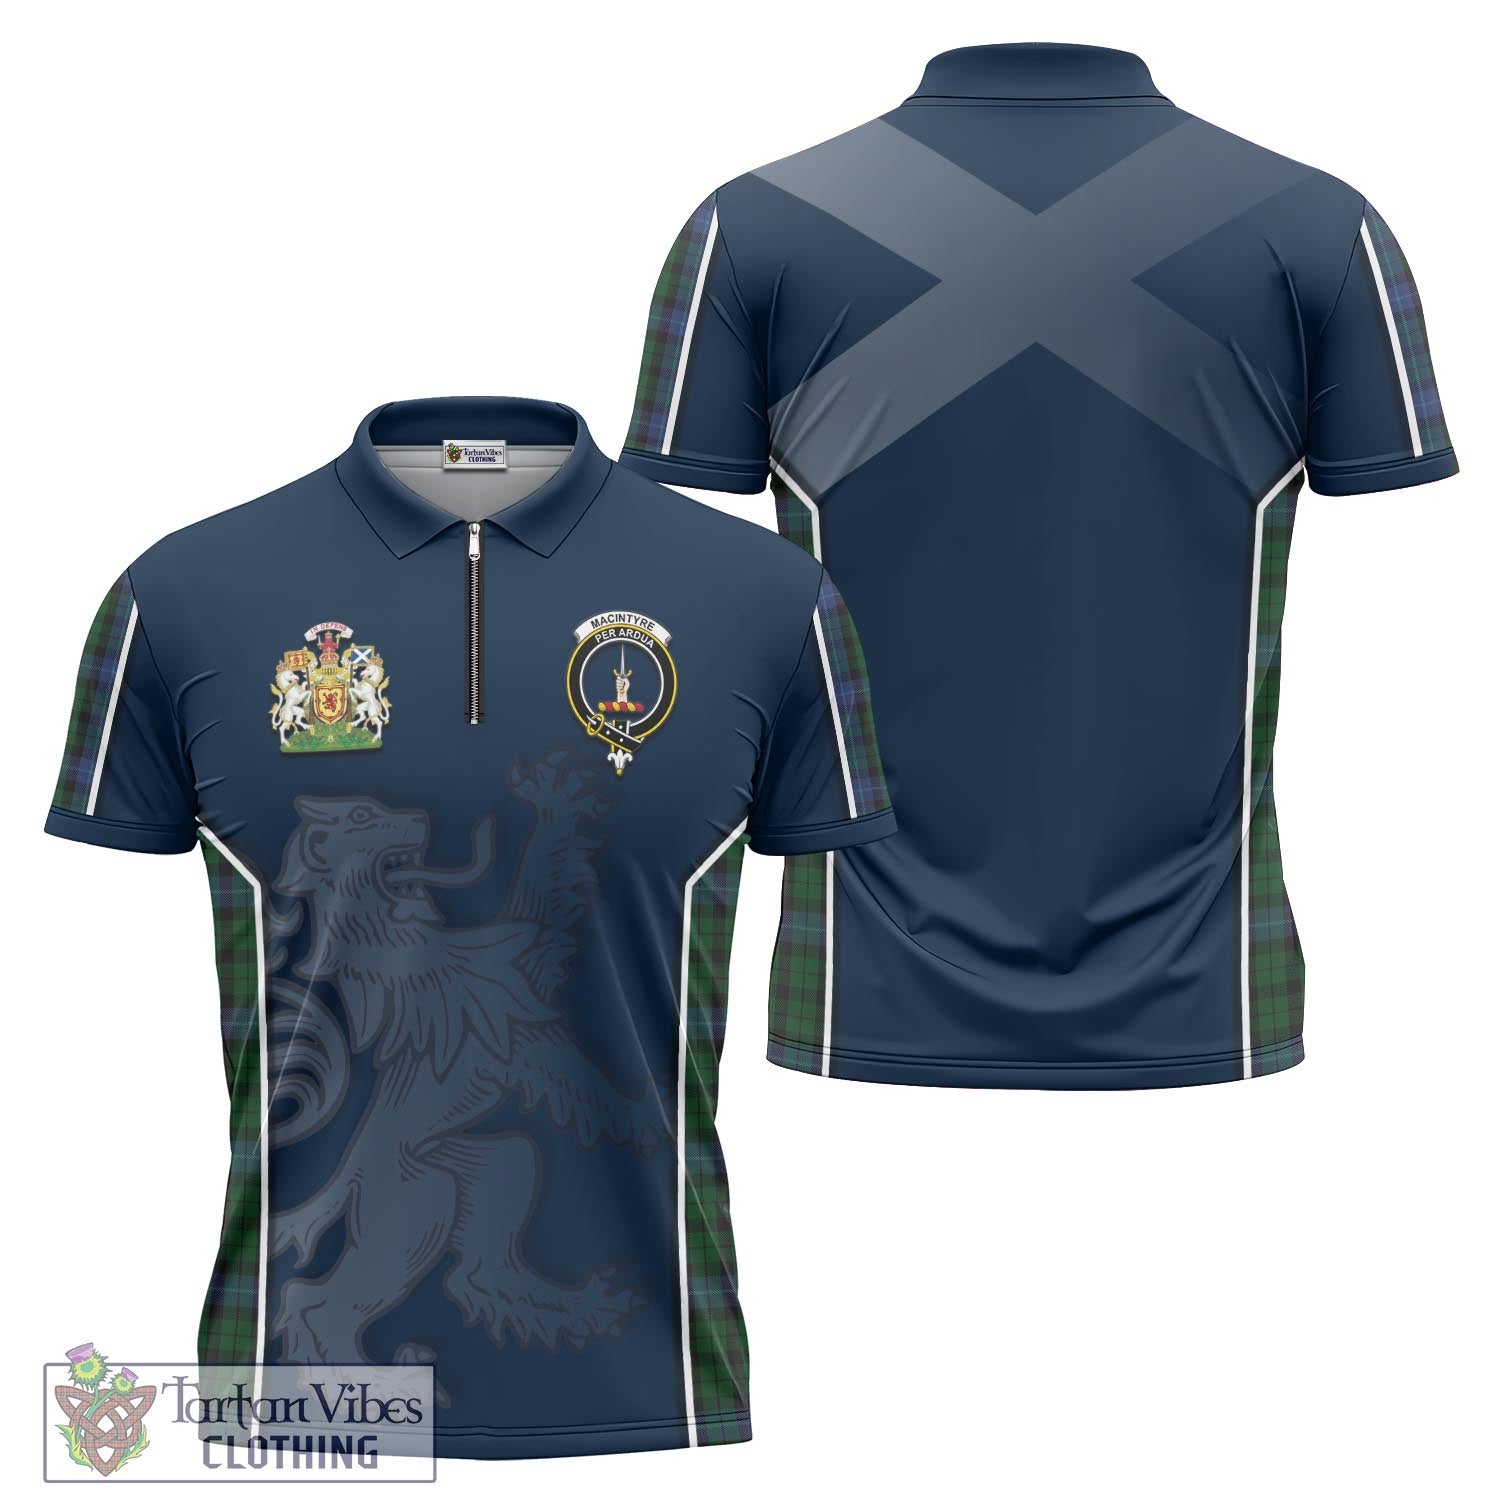 Tartan Vibes Clothing MacIntyre Tartan Zipper Polo Shirt with Family Crest and Lion Rampant Vibes Sport Style